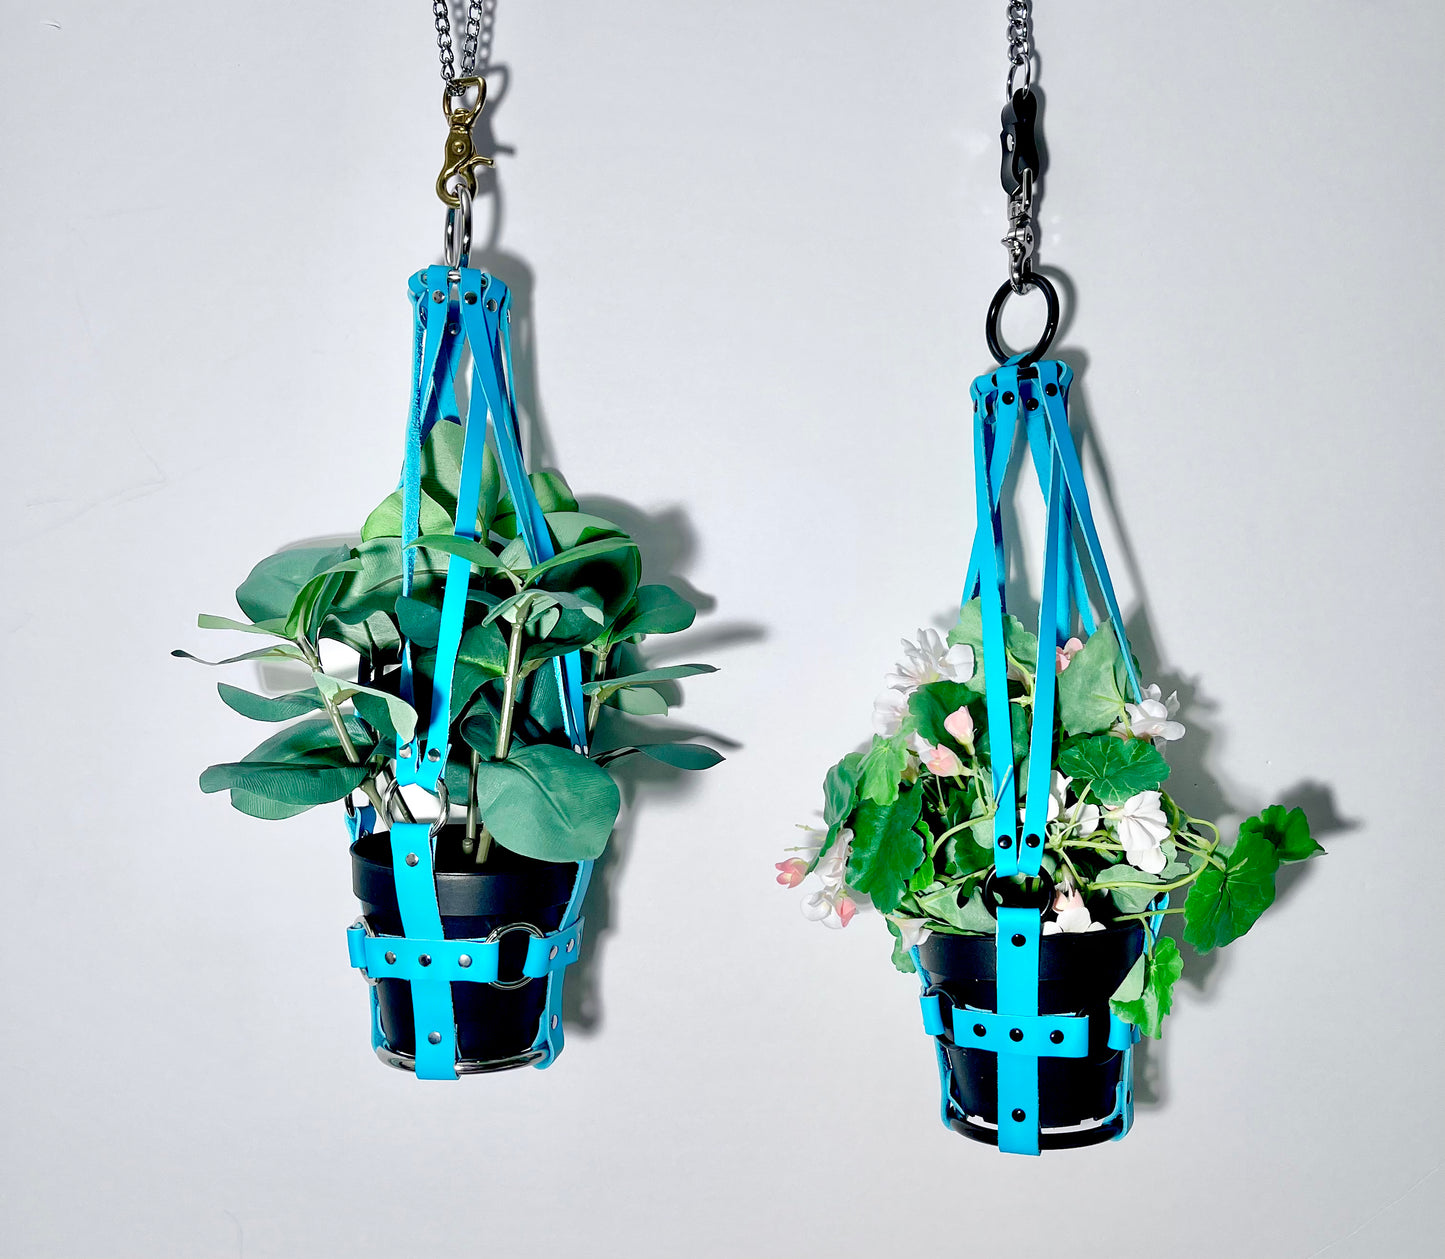 Little Leather Daddy 4" Plant Hanger in Turquoise